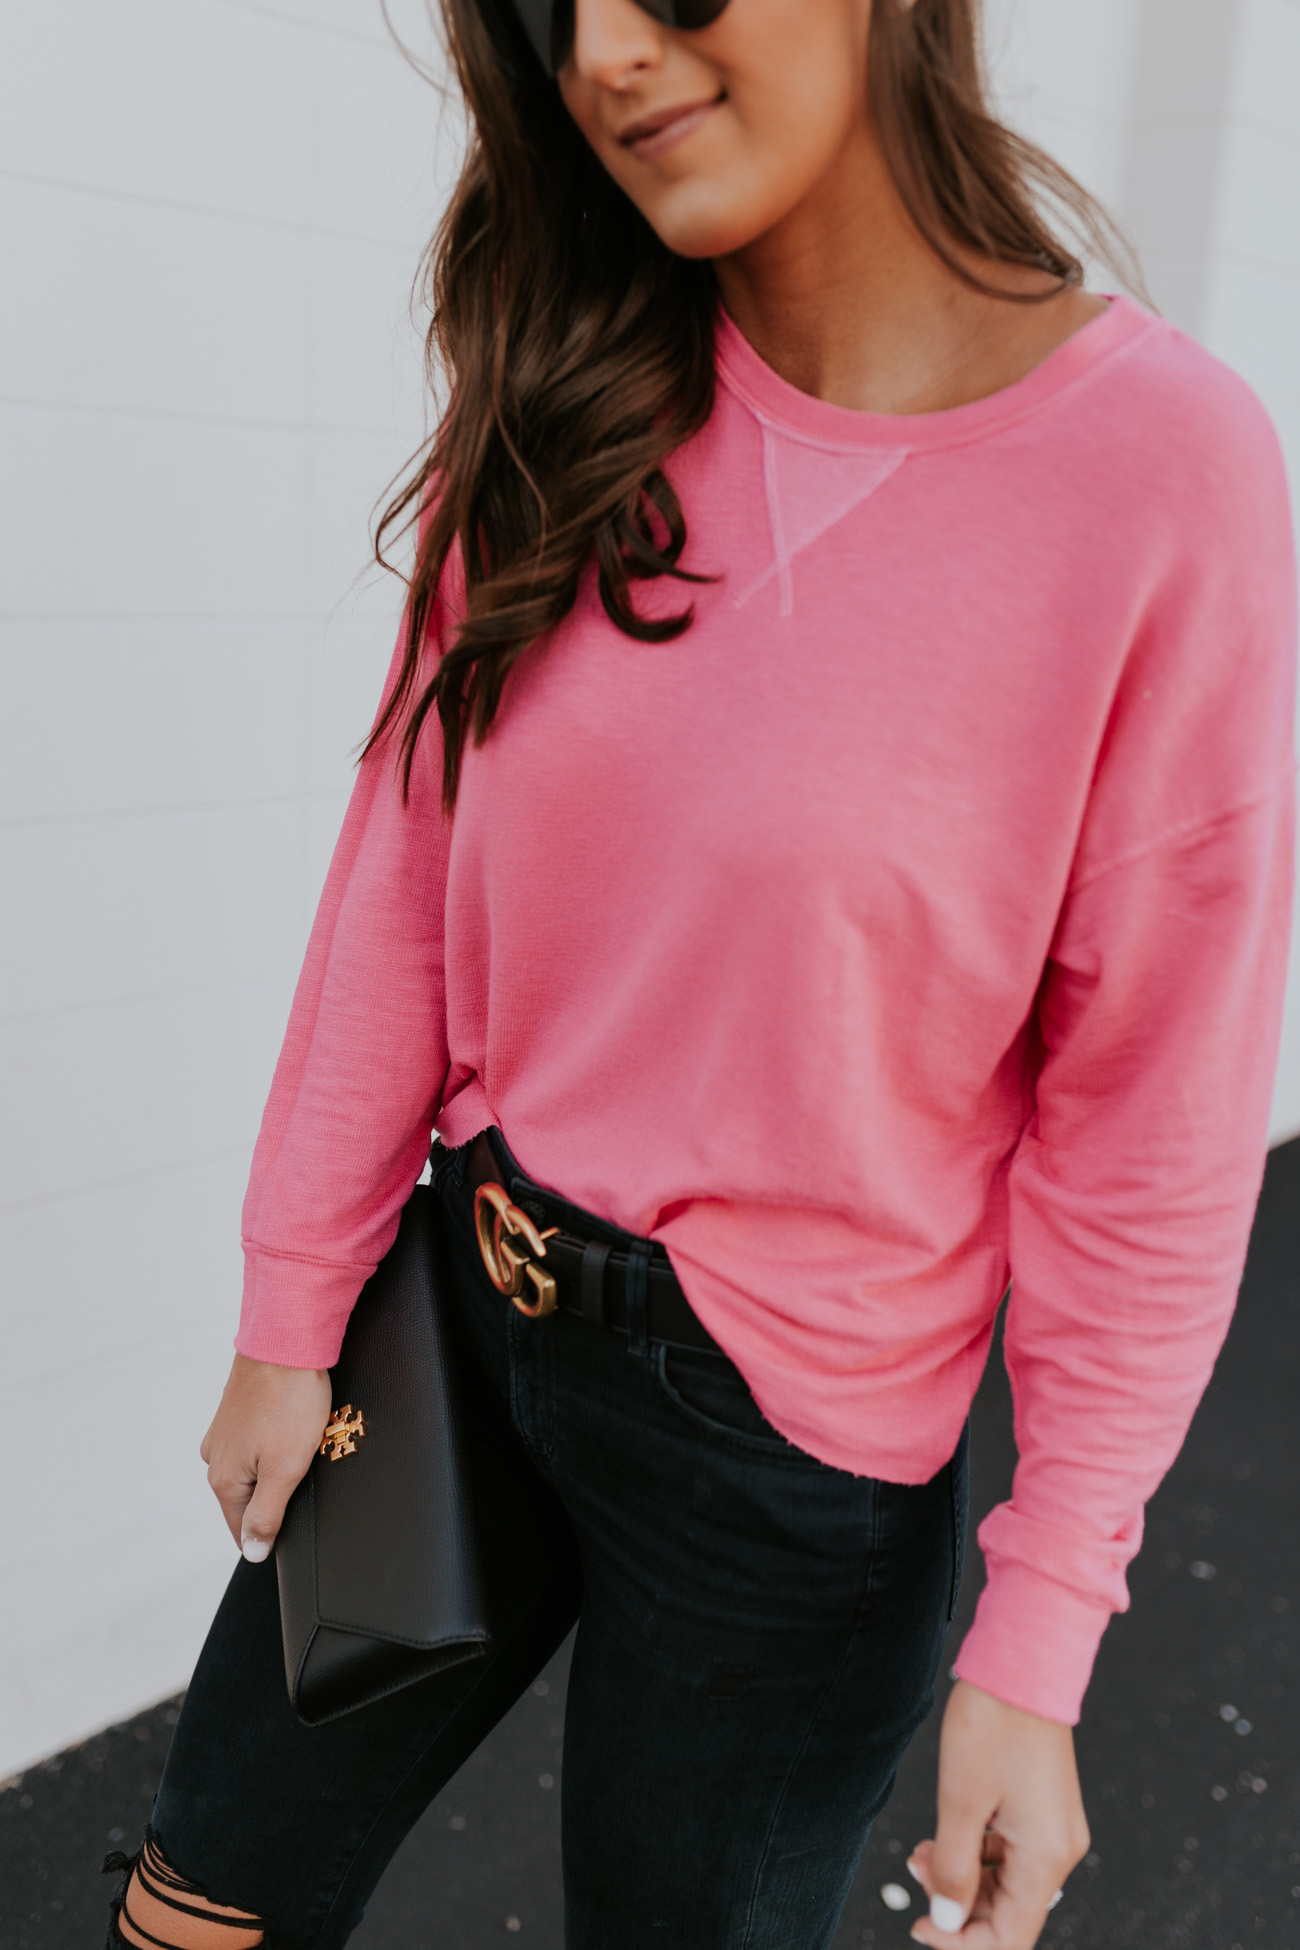 neon pink sweatshirt, cozy style, black distressed jeans, casual fashion, casual outfit, gucci belt, black gucci belt, tory burch kira envelope clutch // grace white a southern drawl